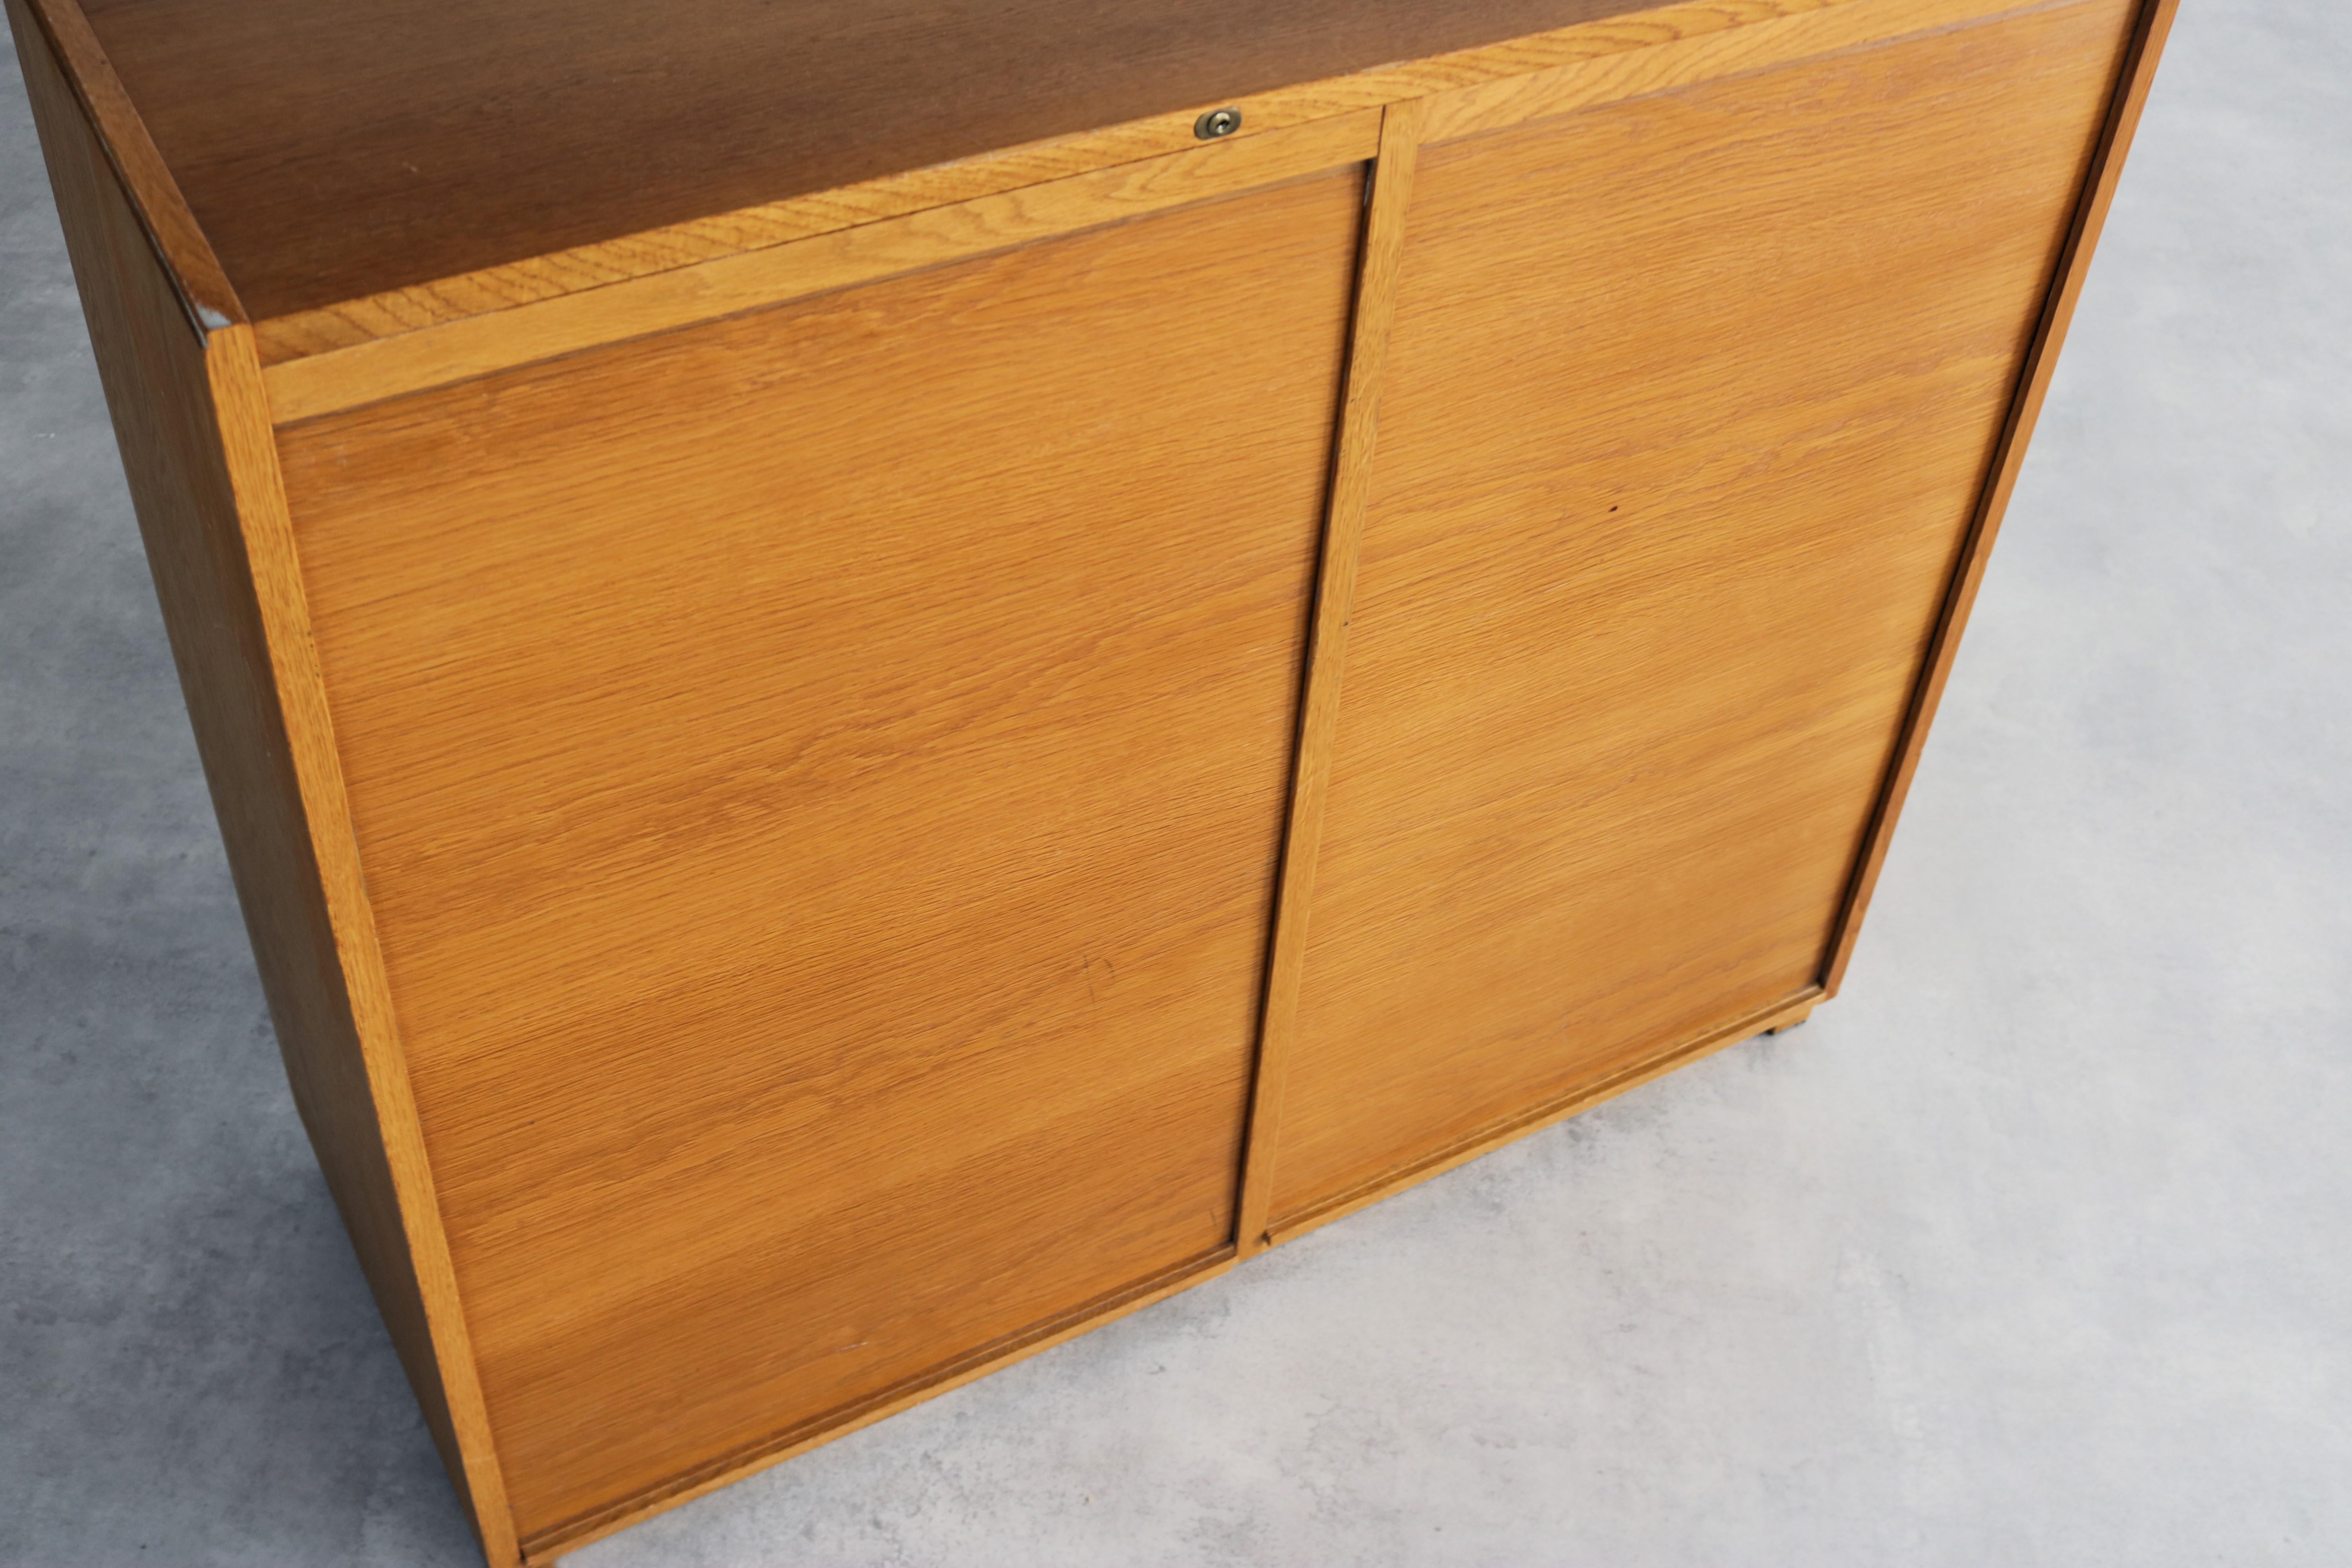 vintage filing cabinet  cupboard  60s  Sweden

period  60's
design  unknown  Sweden
condition  good  light signs of use  key is missing
size  92 x 107 x 43 (hxwxd)

details  oak; plastic; tambour doors;

article number  2206